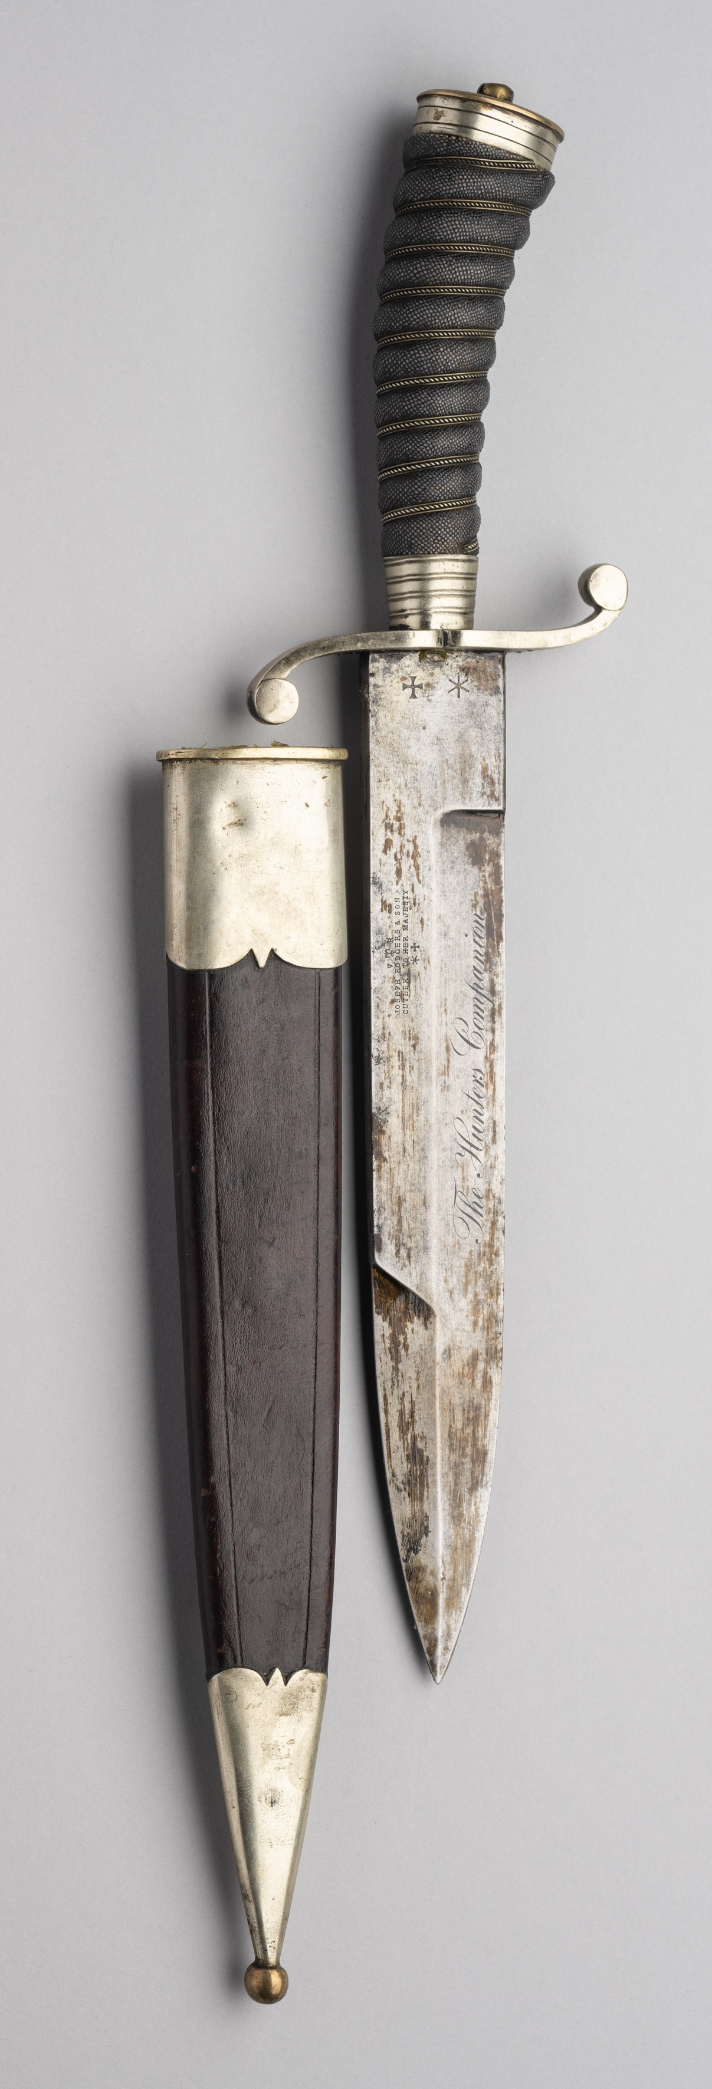 A HUNTING KNIFE, JOSEPH RODGERS & SONS CUTLERS TO HER MAJESTY, SHEFFIELD, CIRCA 1860